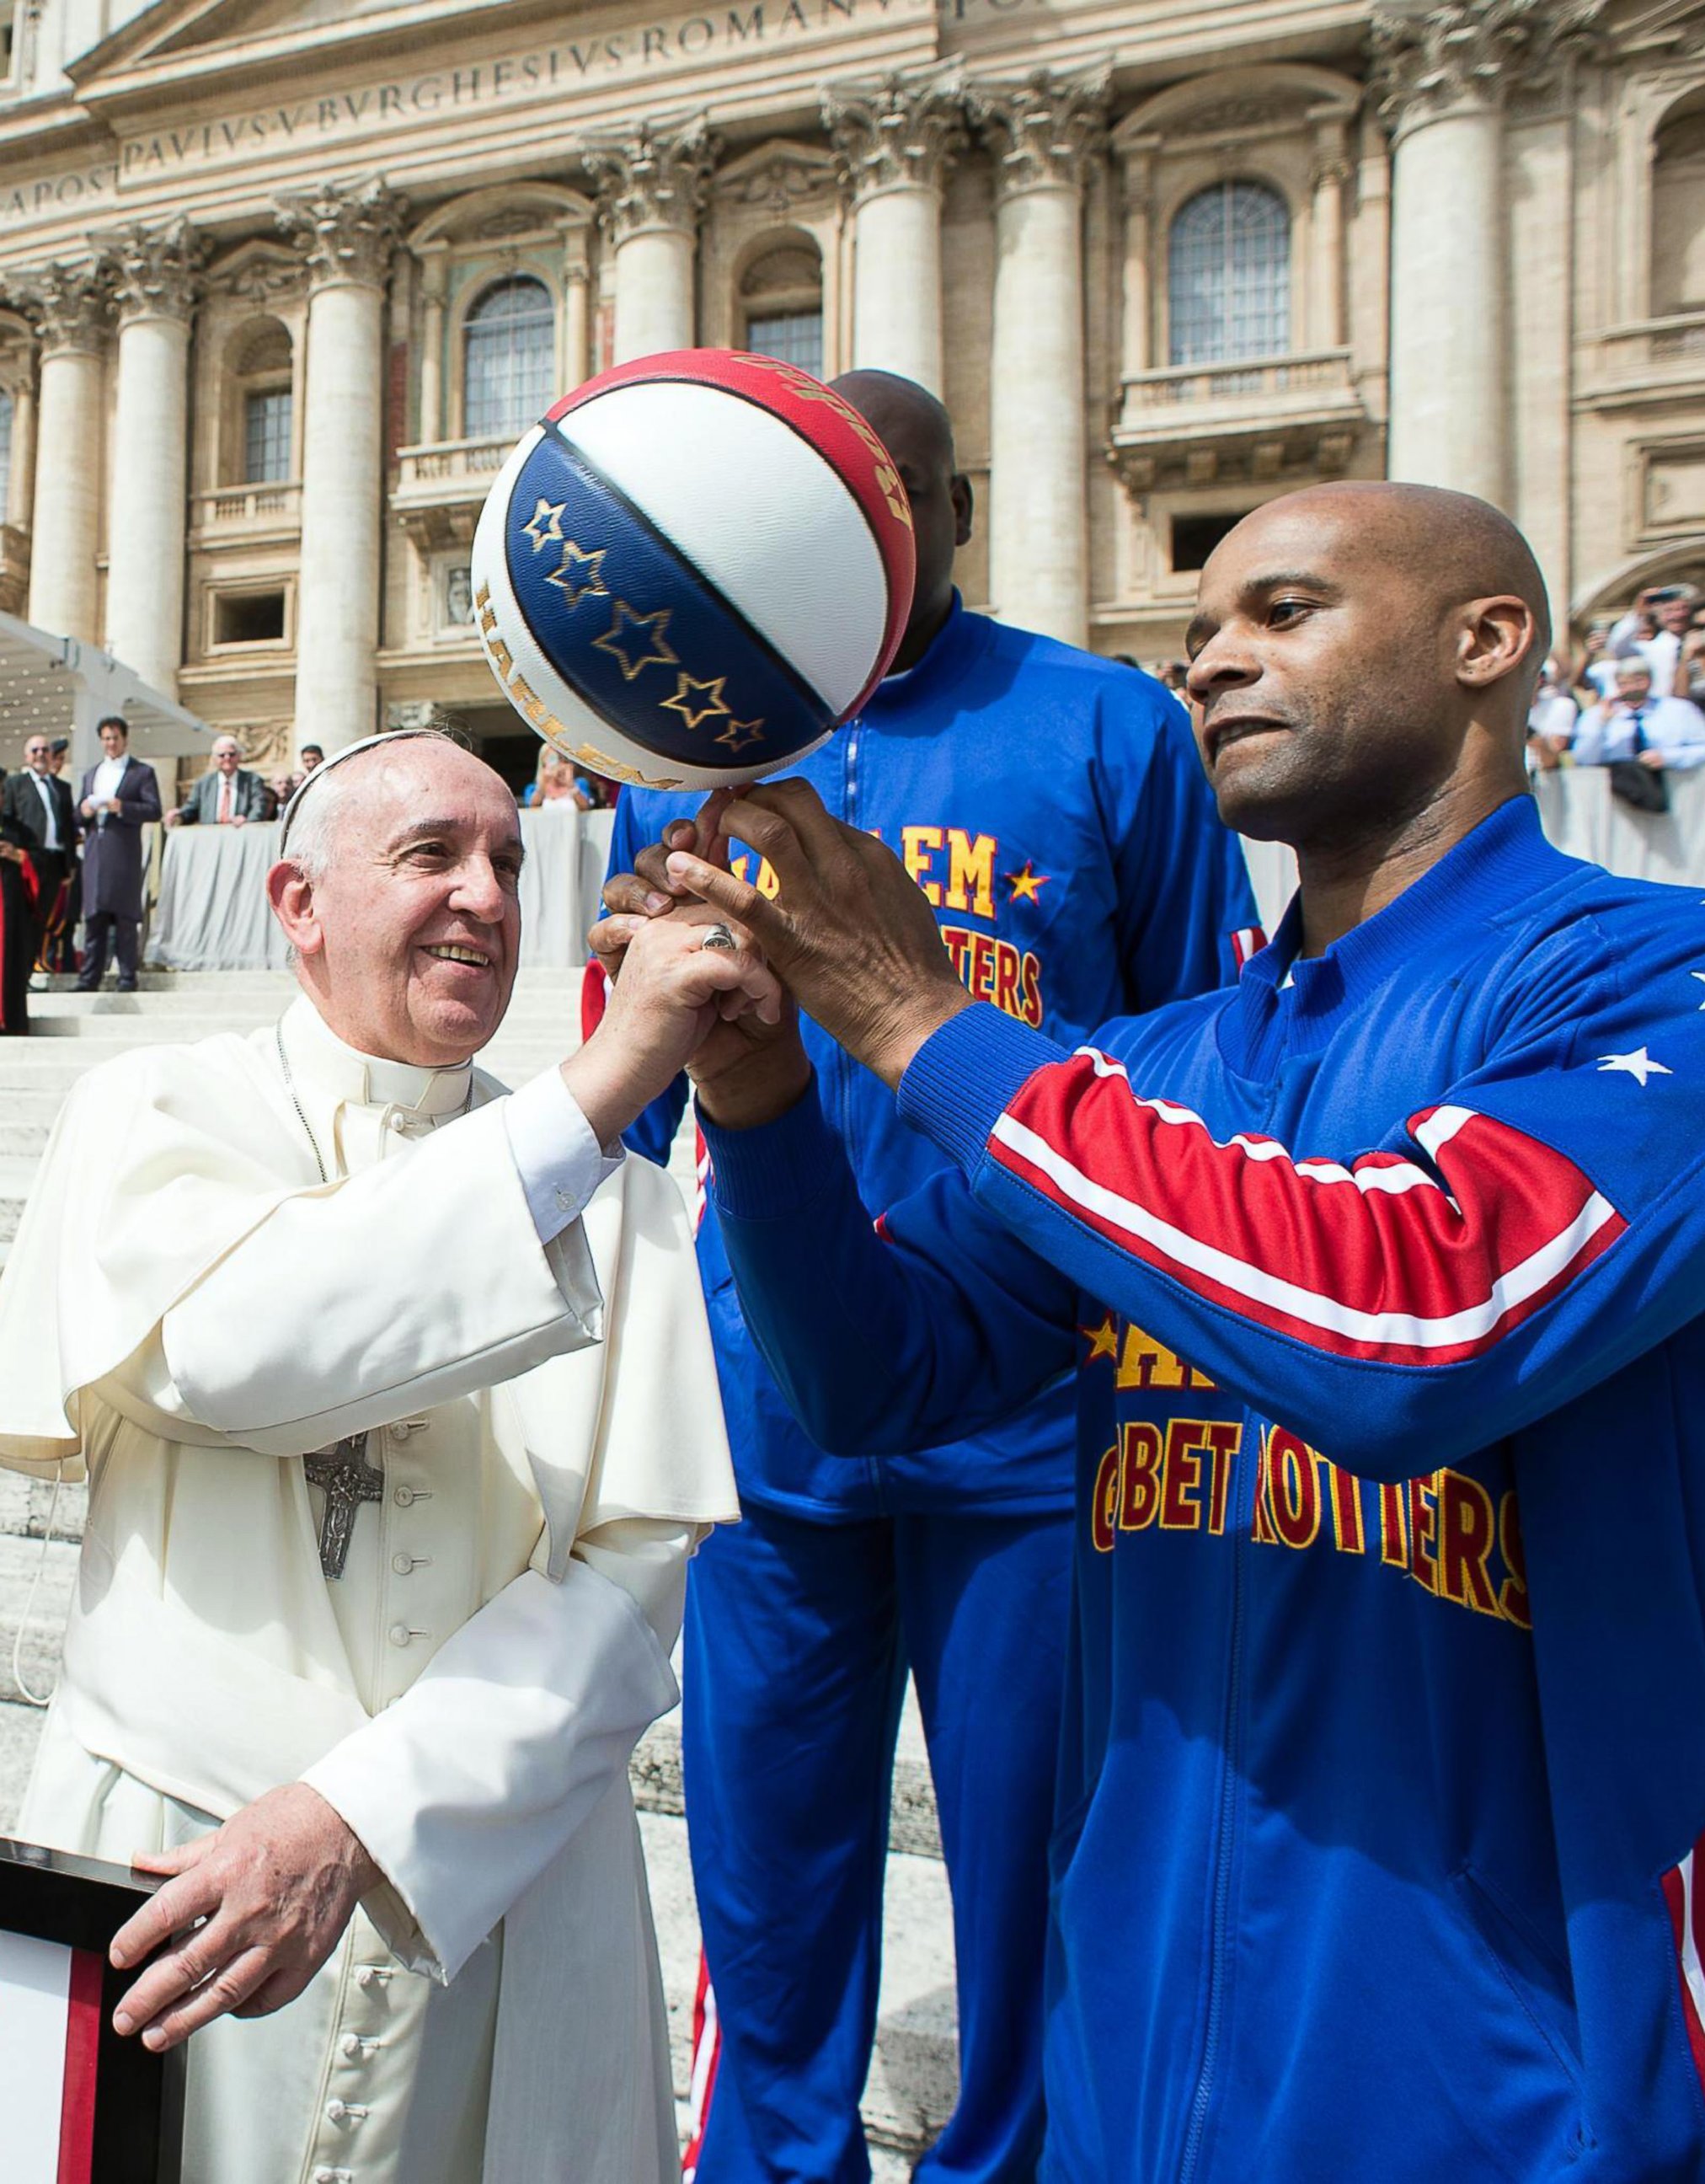 PHOTO: Harlem Globetrotters’ help Pope Francis spin the ball on his finger as they meet during the general audience in St. Peter's Square at the Vatican, May 6, 2015